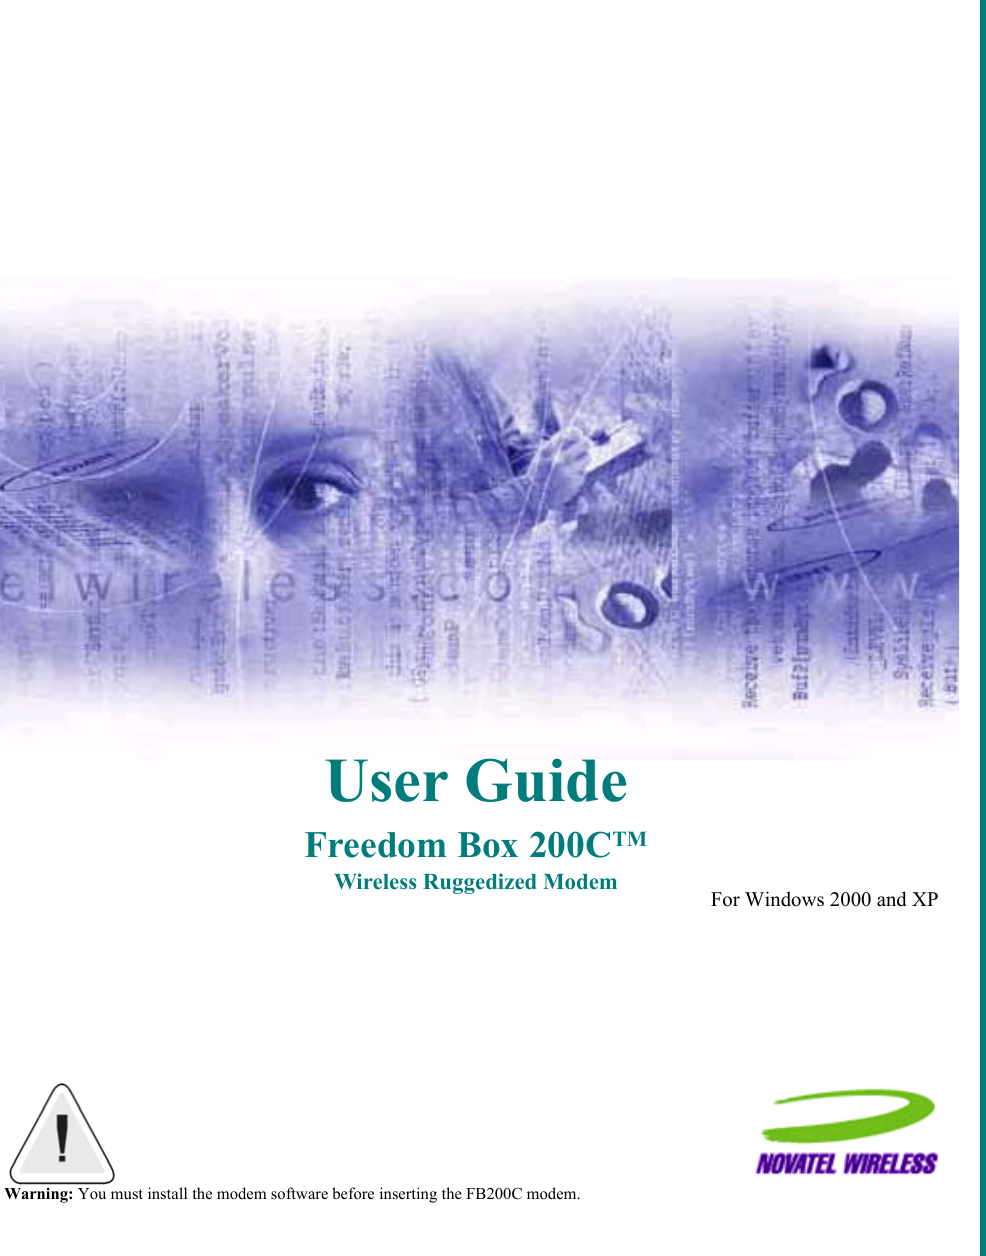 User GuideFreedom Box 200CTMWireless Ruggedized Modem For Windows 2000 and XPWarning: You must install the modem software before inserting the FB200C modem. 